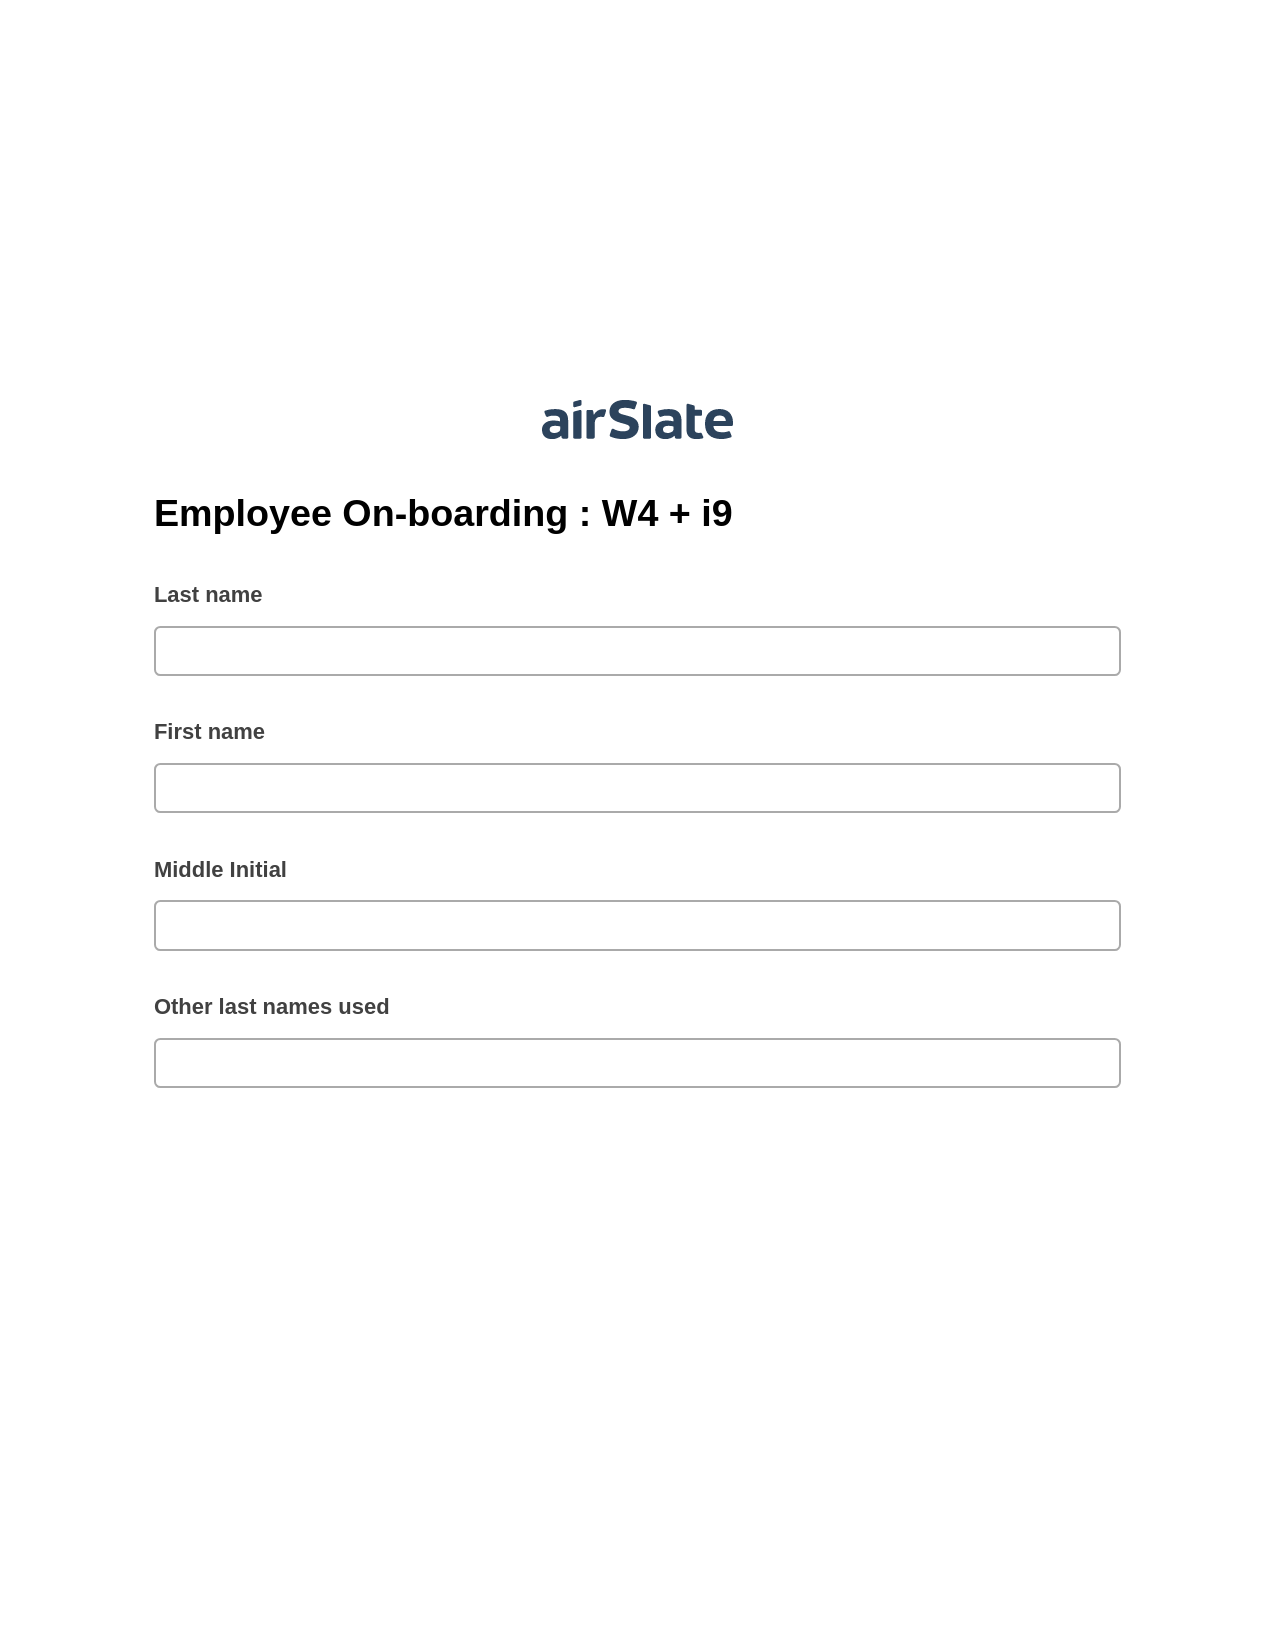 Employee On-boarding : W4 + i9 Pre-fill Dropdowns from Excel Bot, Unassign Role Bot, Export to Formstack Documents Bot